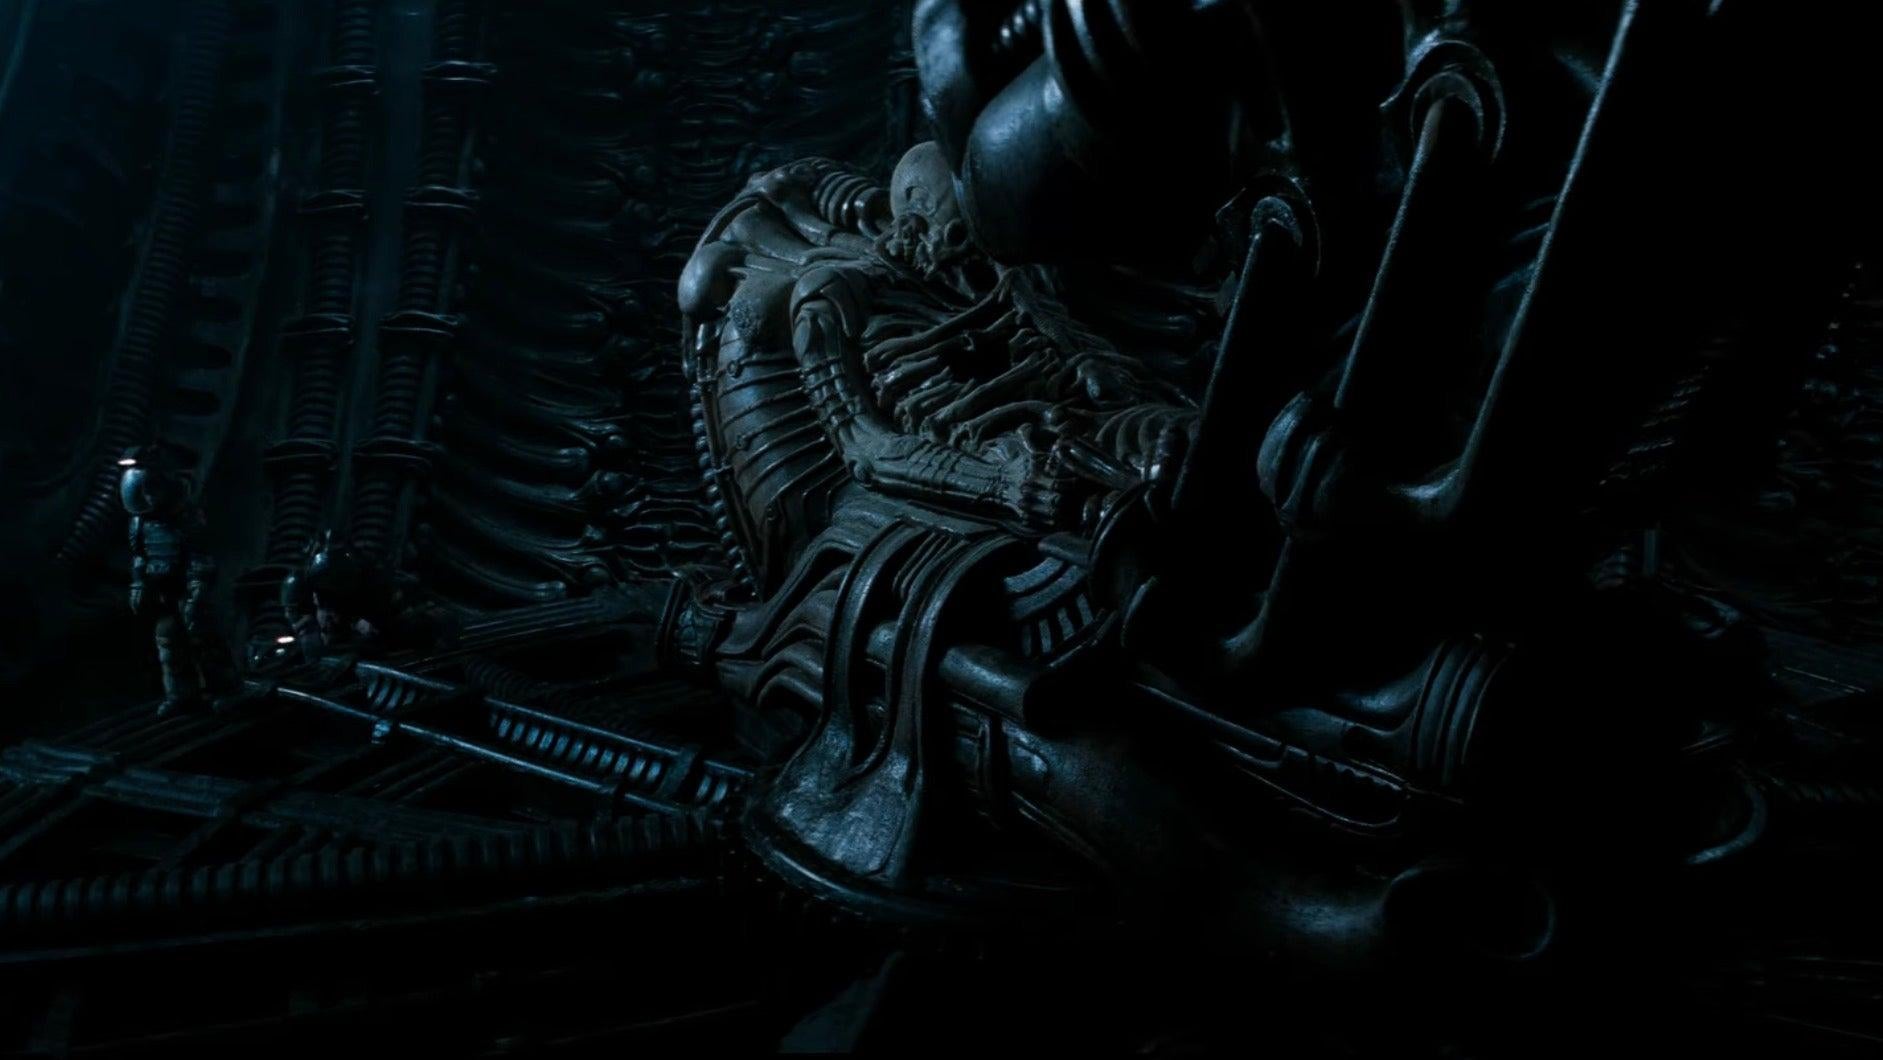 Take a seat and enjoy the original Alien back in theaters.